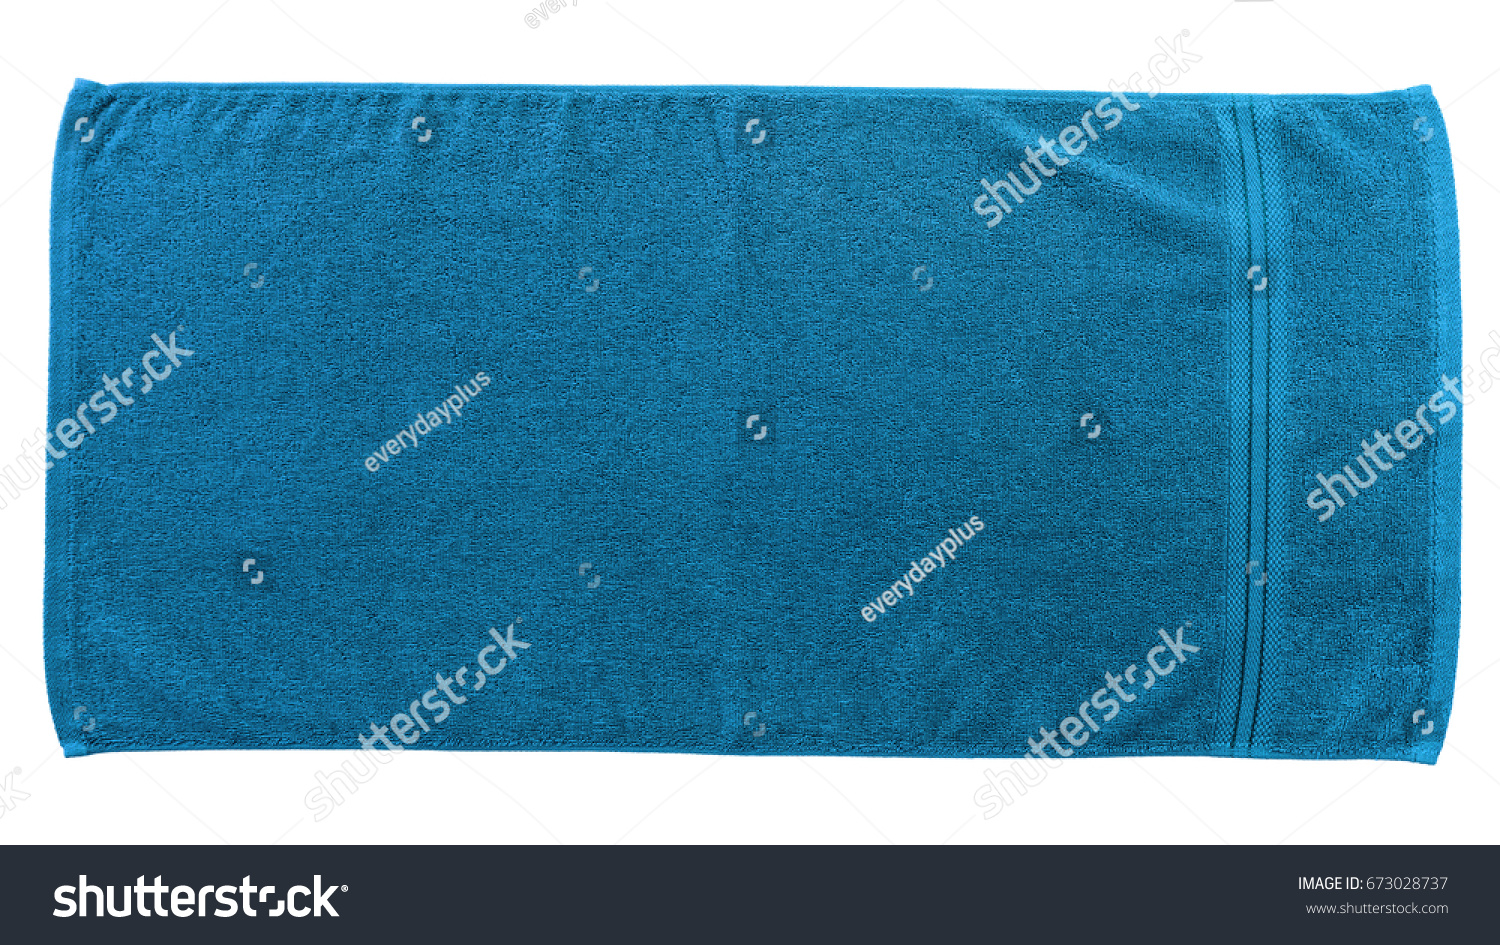 Blue beach towel isolated on white background #673028737